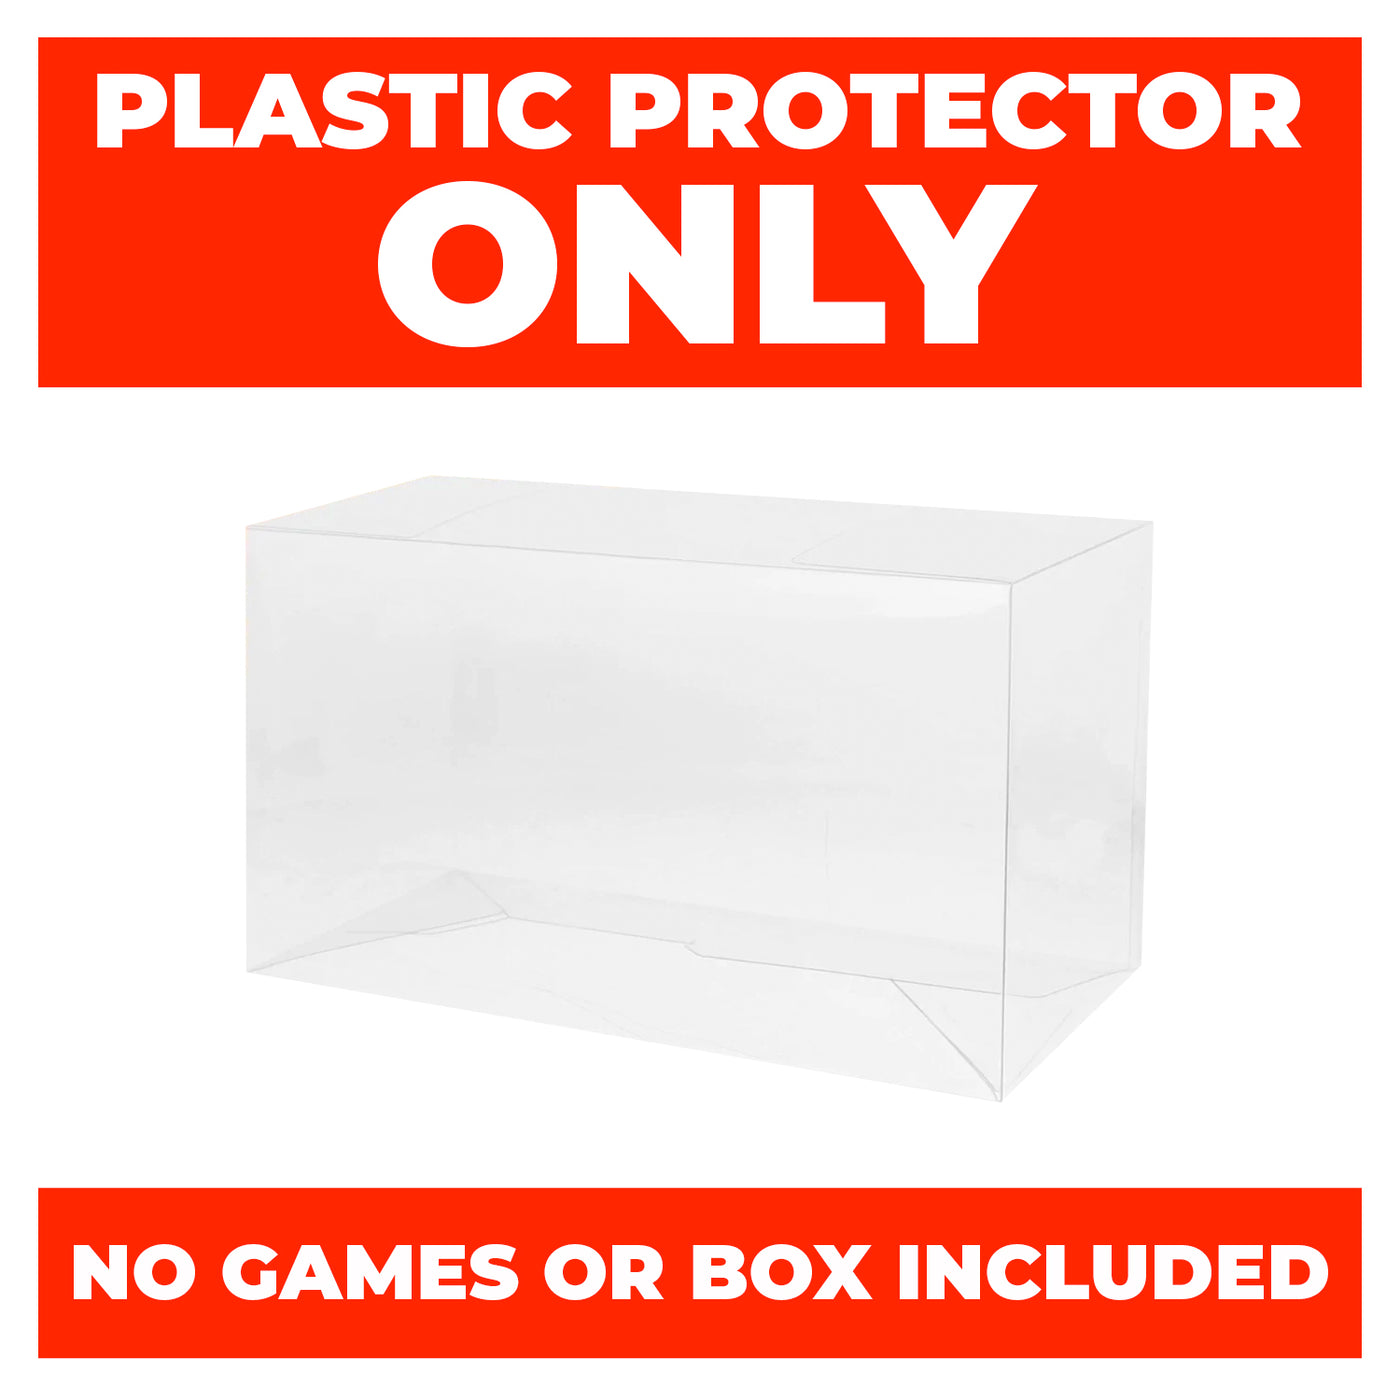 Plastic Protector for SNES Video Game Console Box 0.50mm thick, UV & Scratch Resistant on The Pop Protector Guide by Display Geek